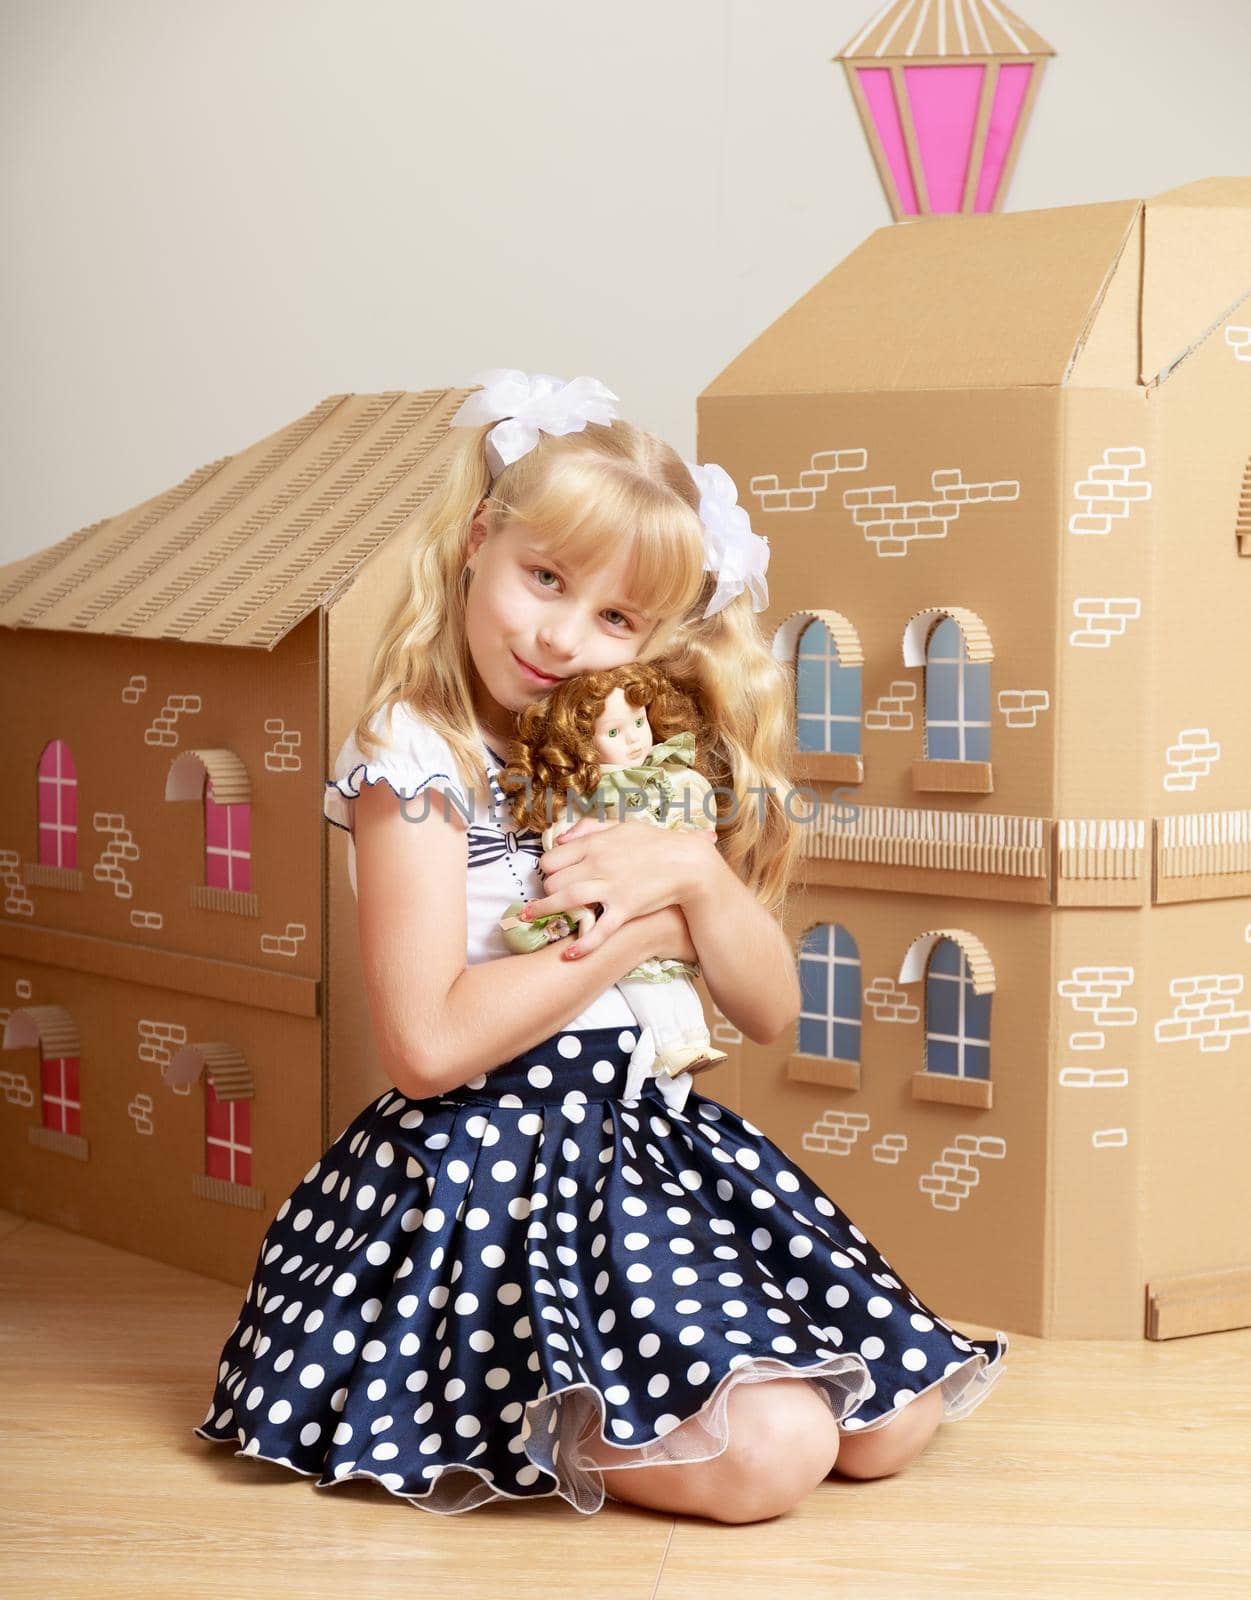 Beautiful little girl with long blonde ponytails on her head , playing with a doll near a cardboard house